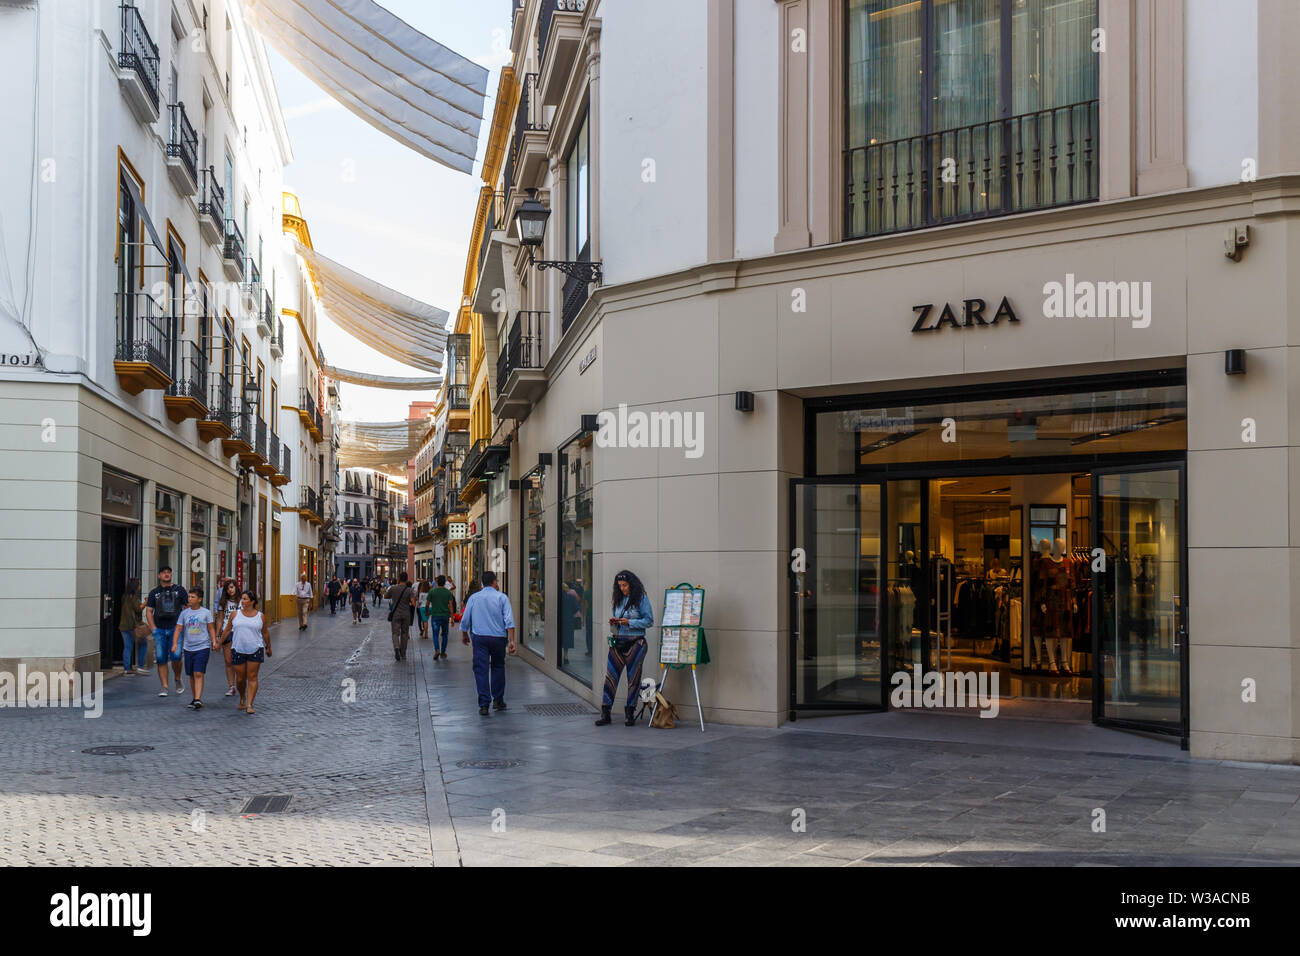 Seville, Spain - September 3rd 2015: Shopping street with a Zara store. Zara is the main brand of the Inditex group Stock Photo